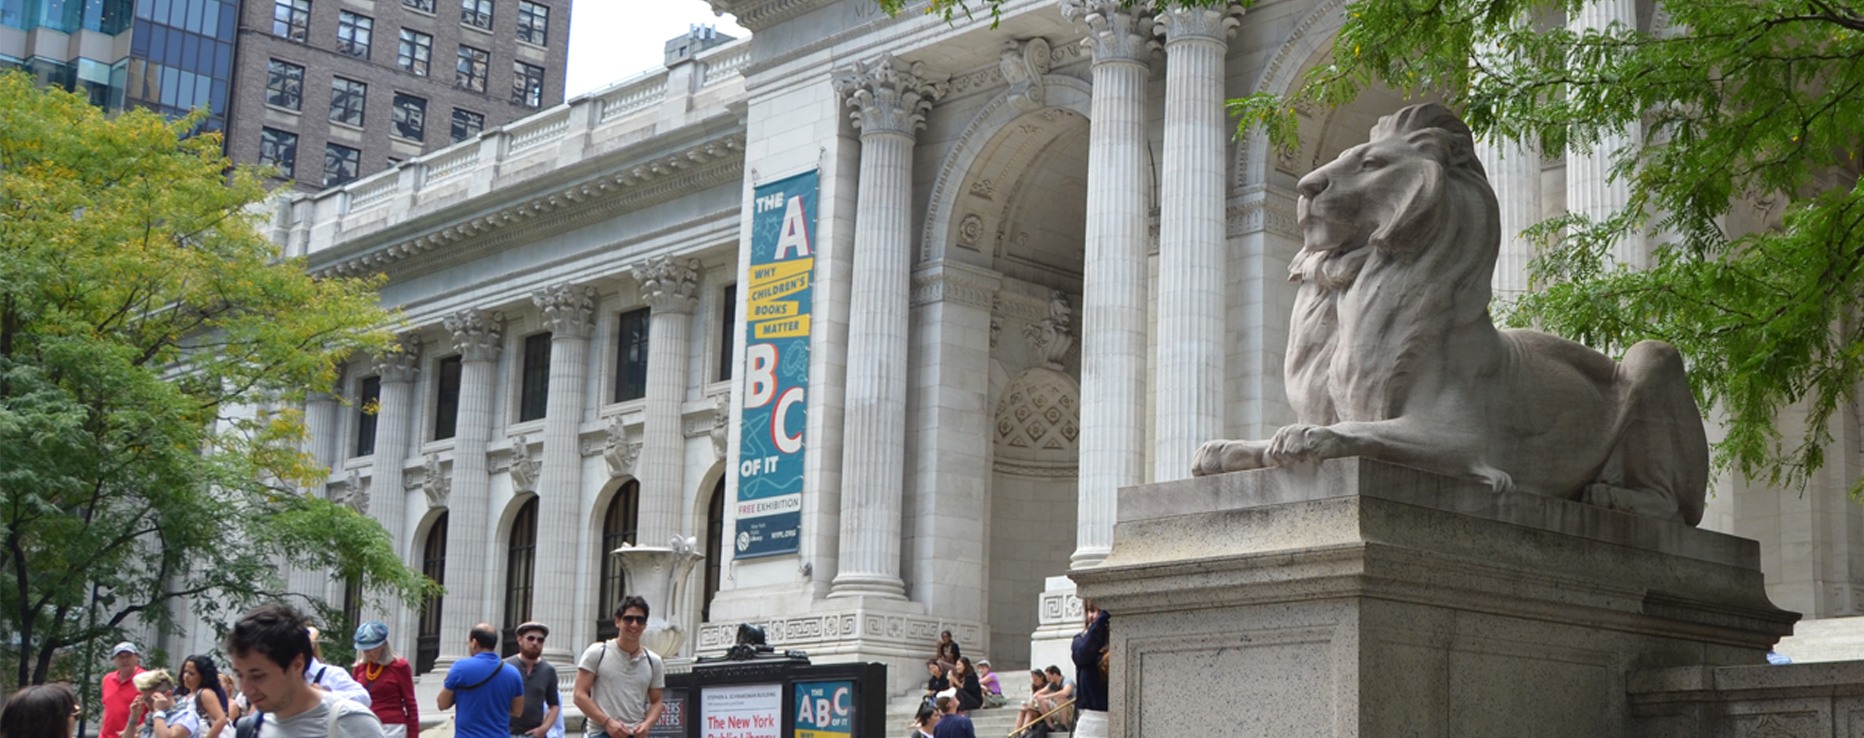 Lion statue at New York Public Library in Bryant Park